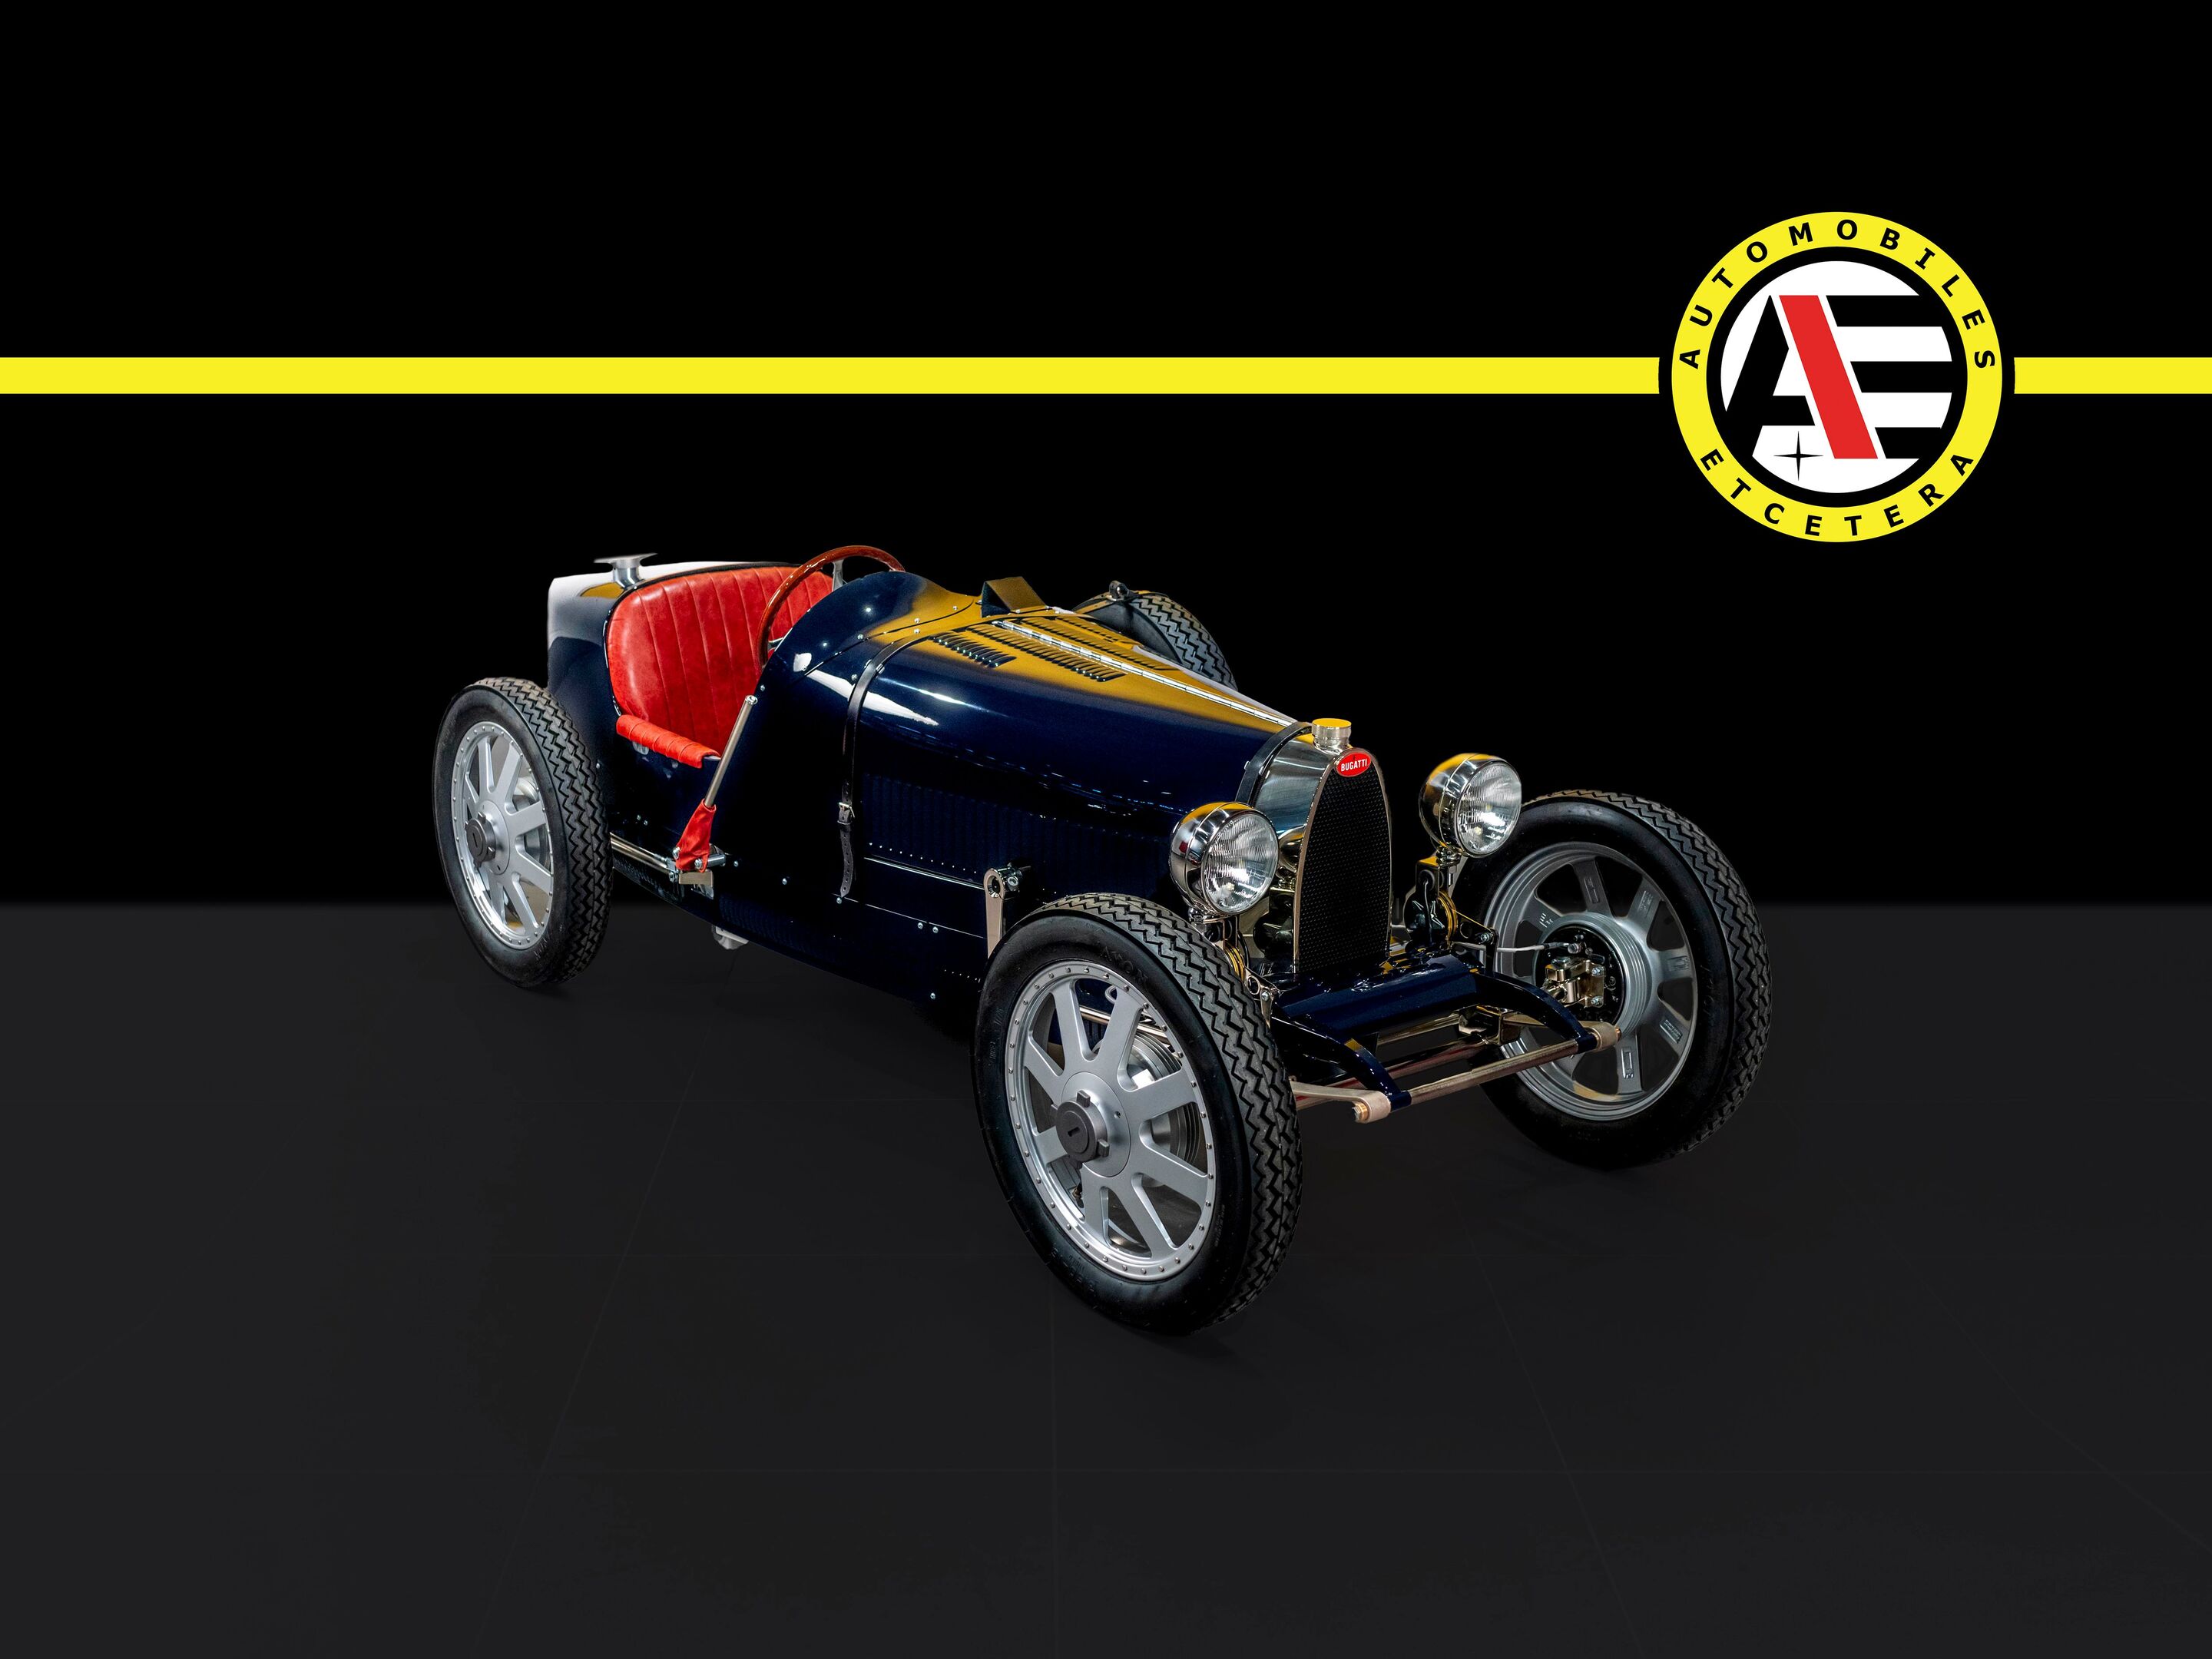 2023 Bugatti Roadster Electric Type 35 miniature by The Little Car Co.